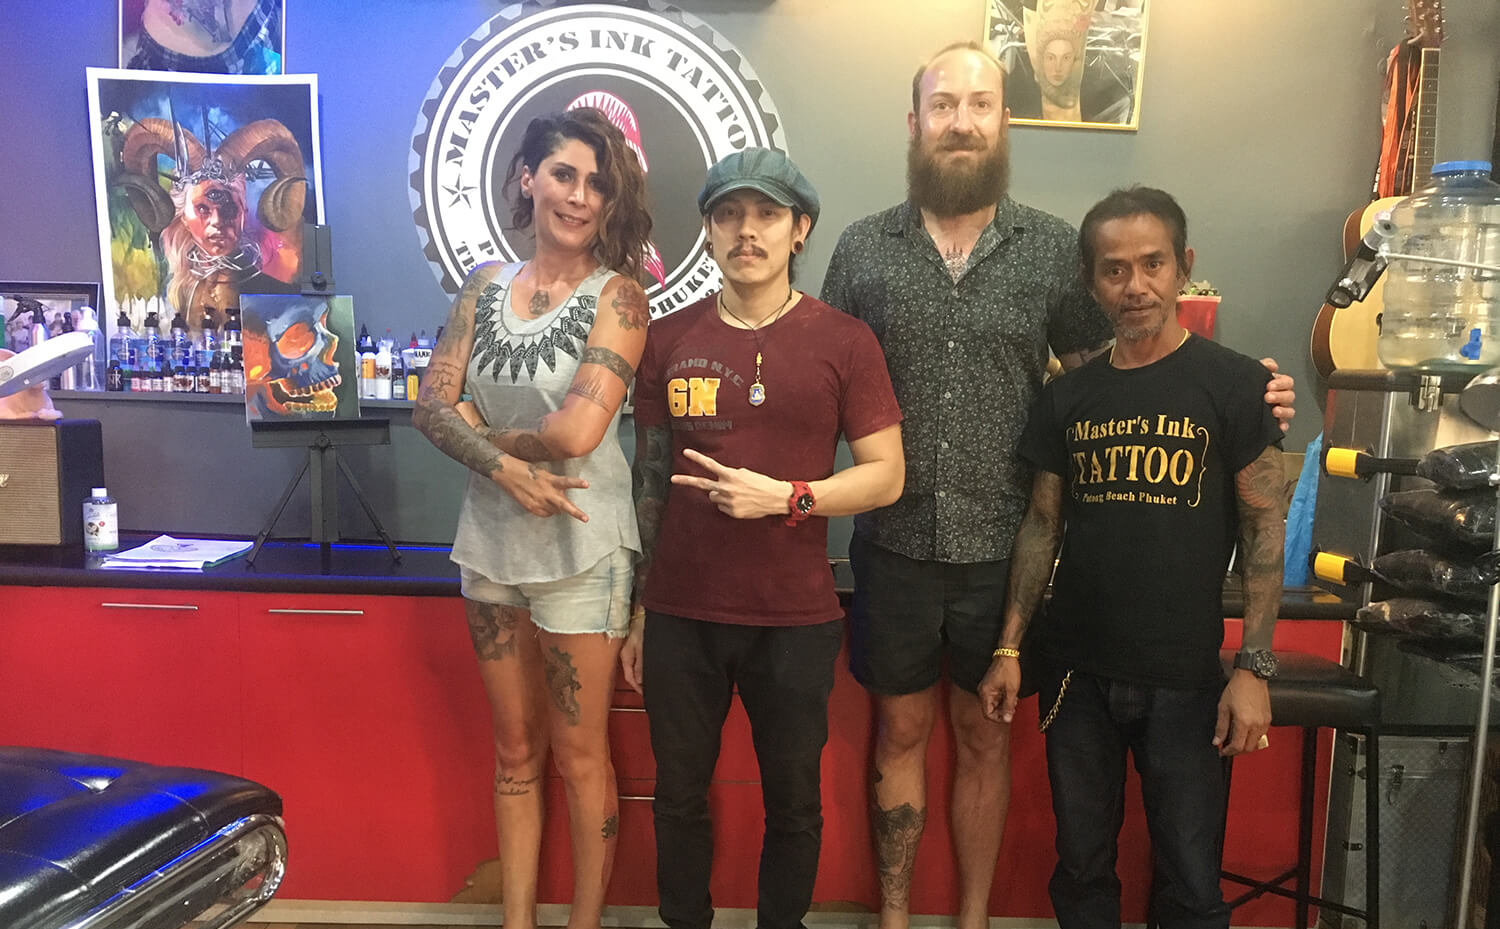 Masters Ink Thailand